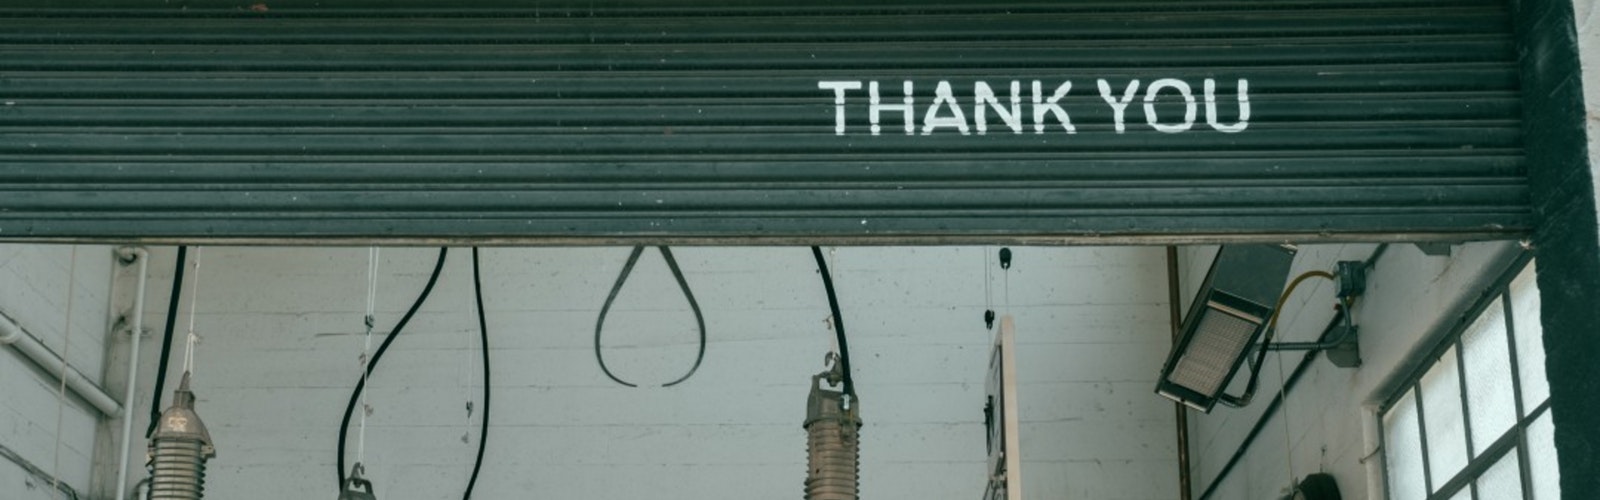 5 Employee Engagement Ideas On How To Simply Say Thank You